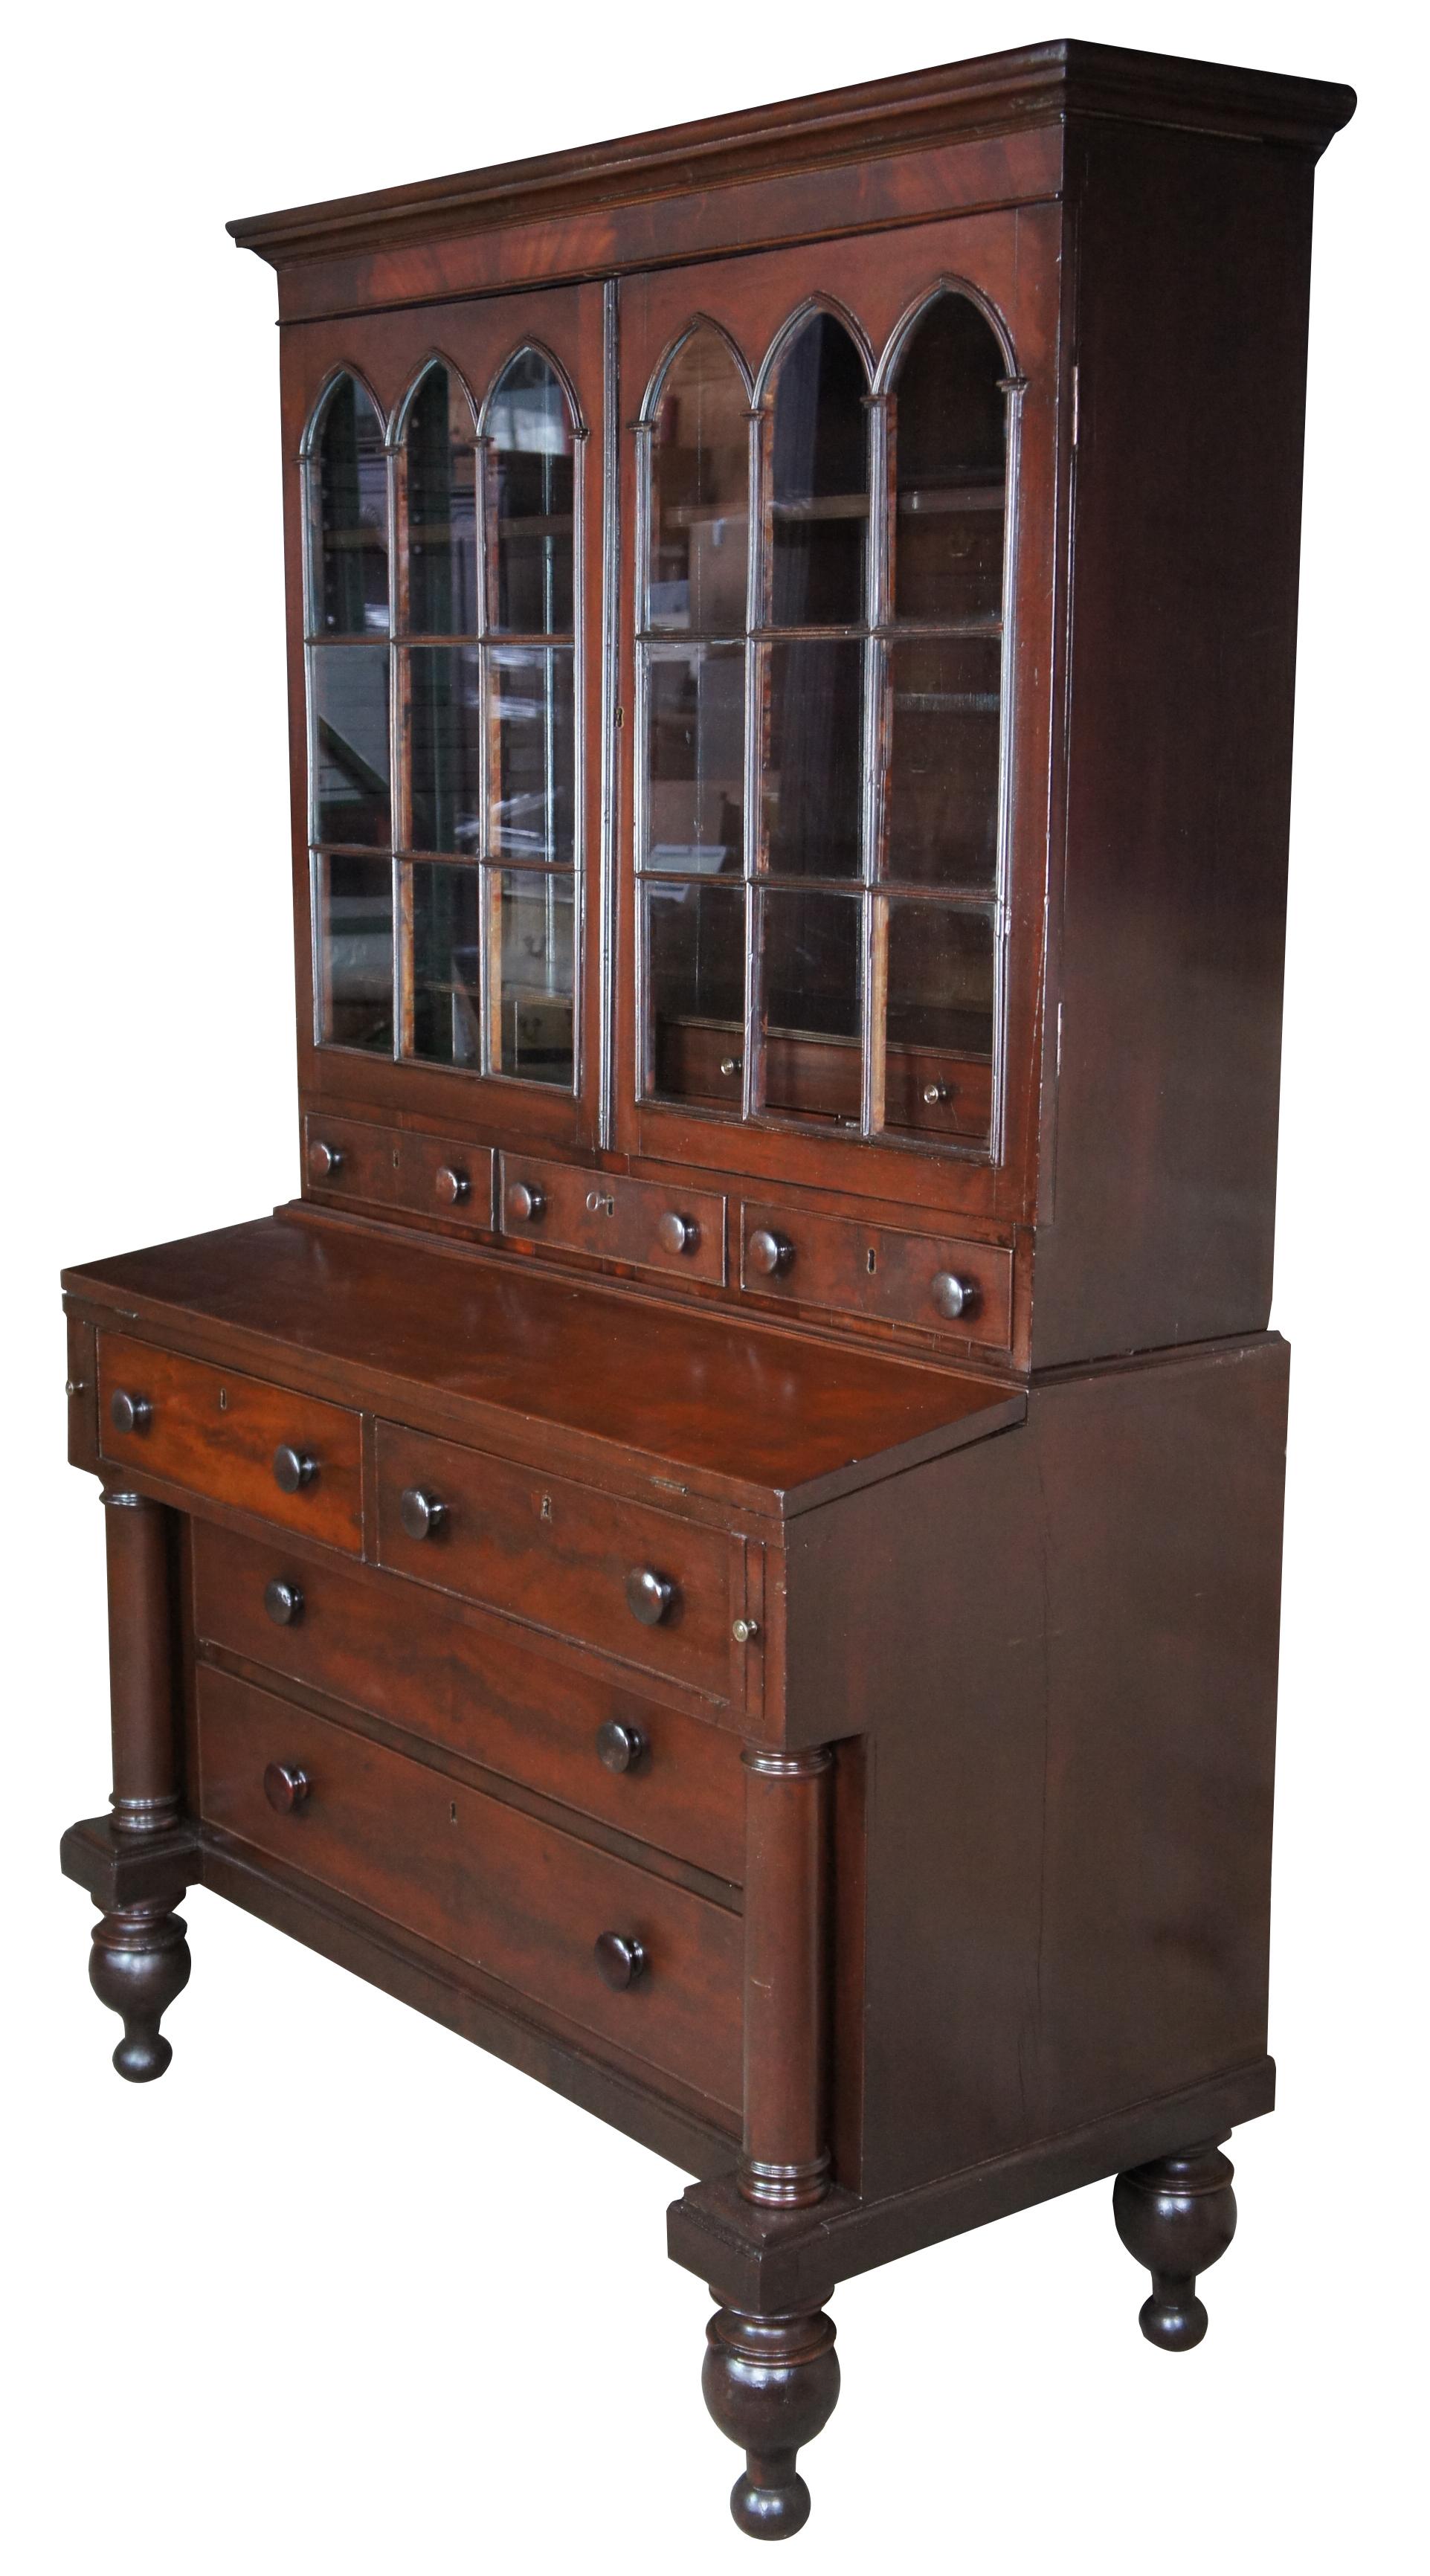 A fine and impressive Federal Period Mahogany secretary and bookcase, circa 1830s. The bookcase features an eighteen pane gothic arched cabinet front that opens to two shelves, cubbies and drawers. A flip top writing surface opens to a baize writing